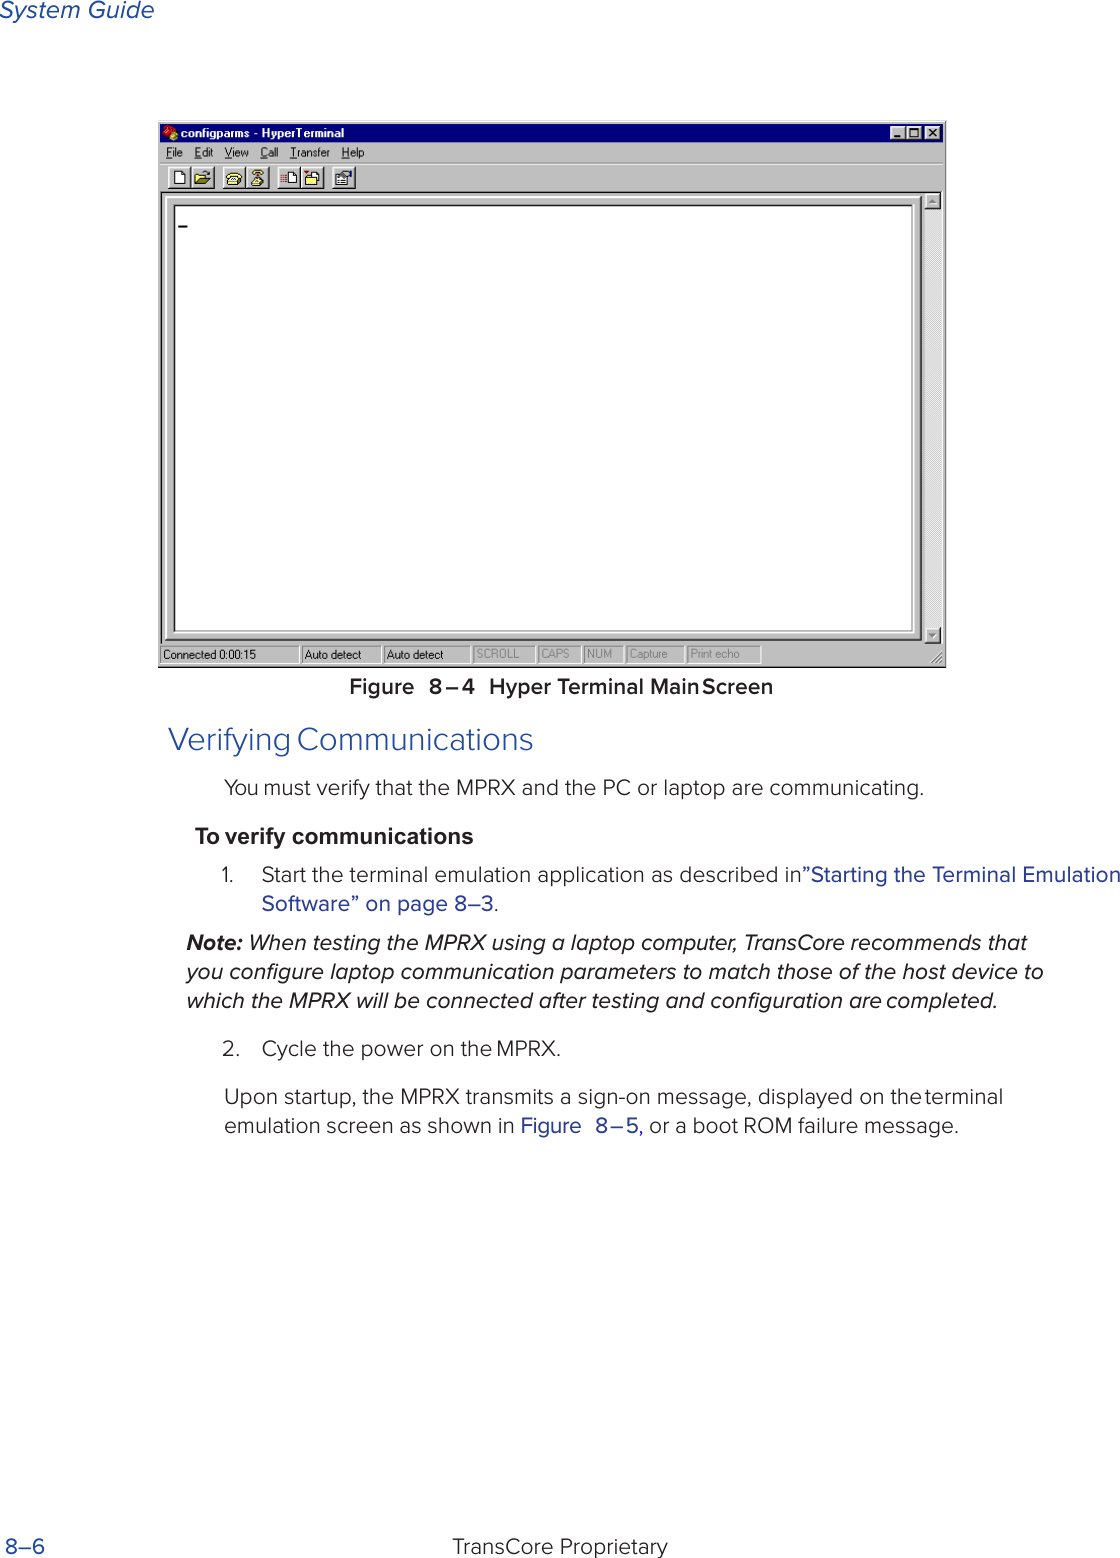 System GuideTransCore Proprietary 8–6Figure 8 – 4 Hyper Terminal Main ScreenVerifying CommunicationsYou must verify that the MPRX and the PC or laptop are communicating.To verify communications1.  Start the terminal emulation application as described in”Starting the Terminal Emulation Software” on page 8–3.Note: When testing the MPRX using a laptop computer, TransCore recommends that you conﬁgure laptop communication parameters to match those of the host device to which the MPRX will be connected after testing and conﬁguration are completed.2.  Cycle the power on the MPRX.Upon startup, the MPRX transmits a sign-on message, displayed on the terminal emulation screen as shown in Figure 8 – 5, or a boot ROM failure message.